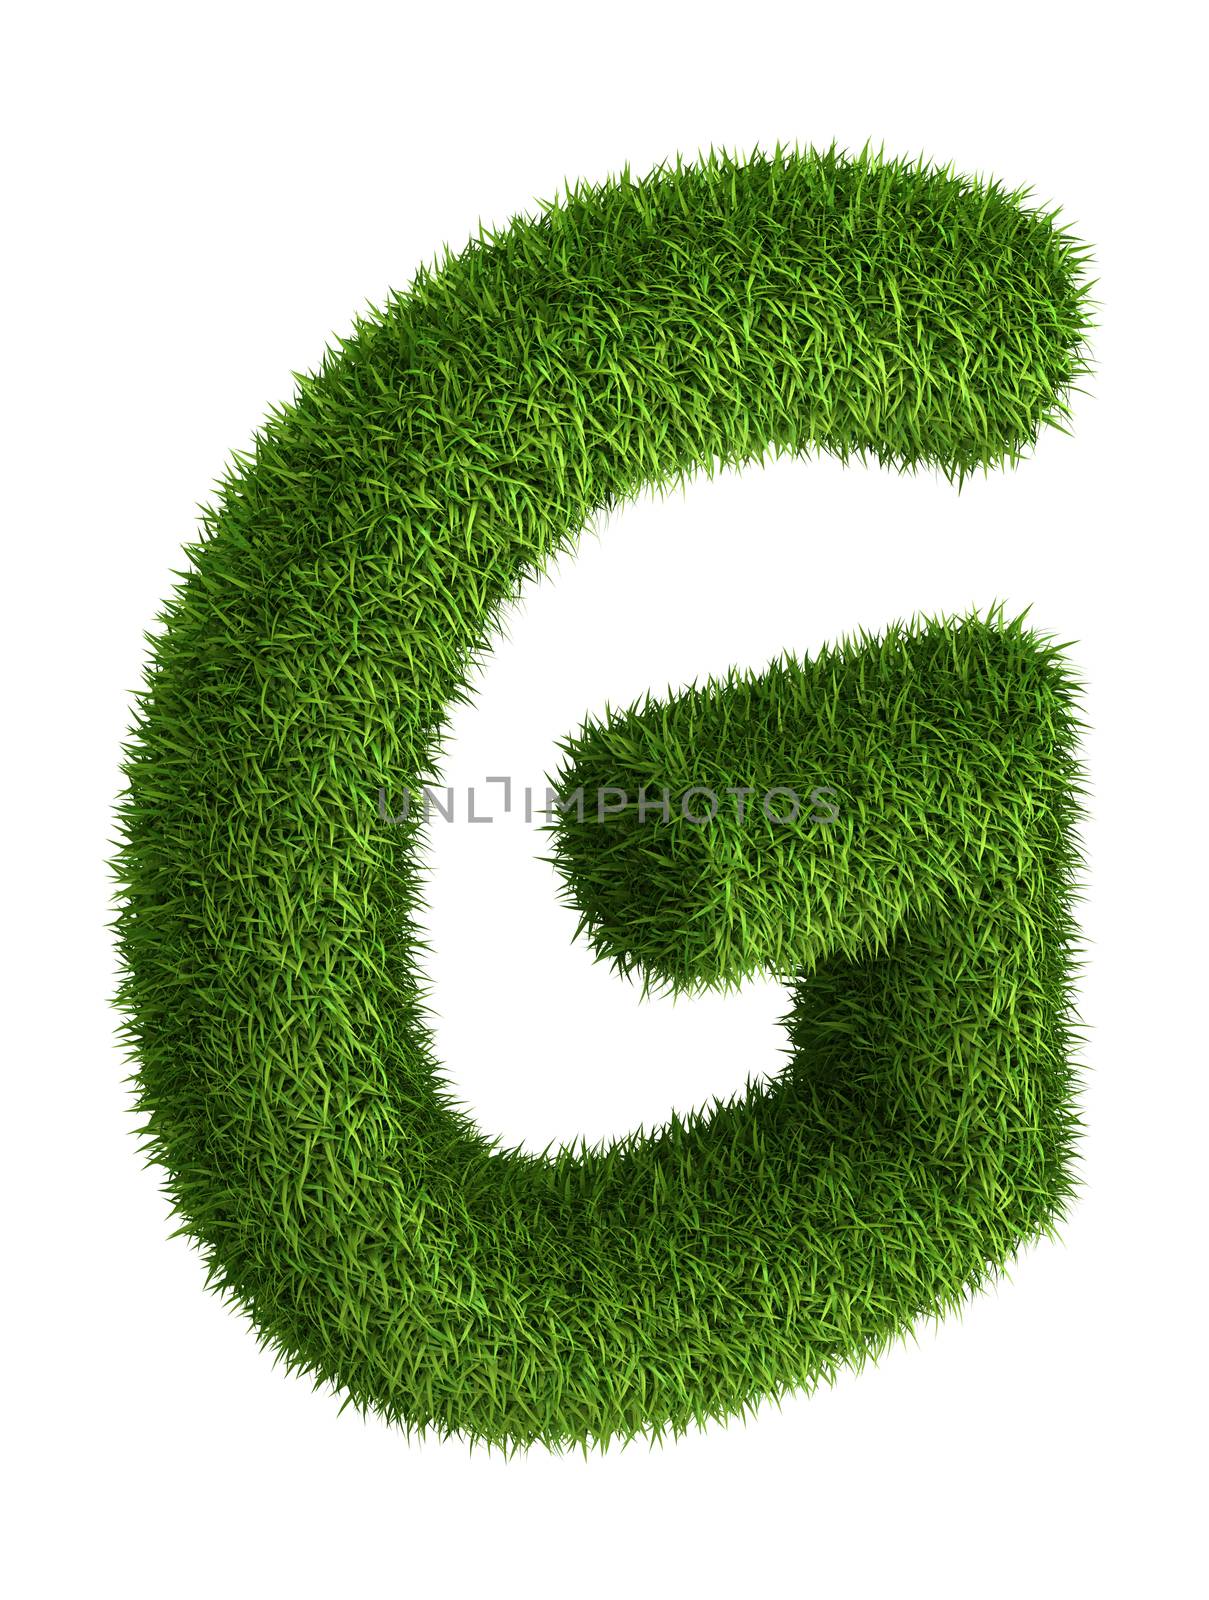 Natural grass letter G by iunewind